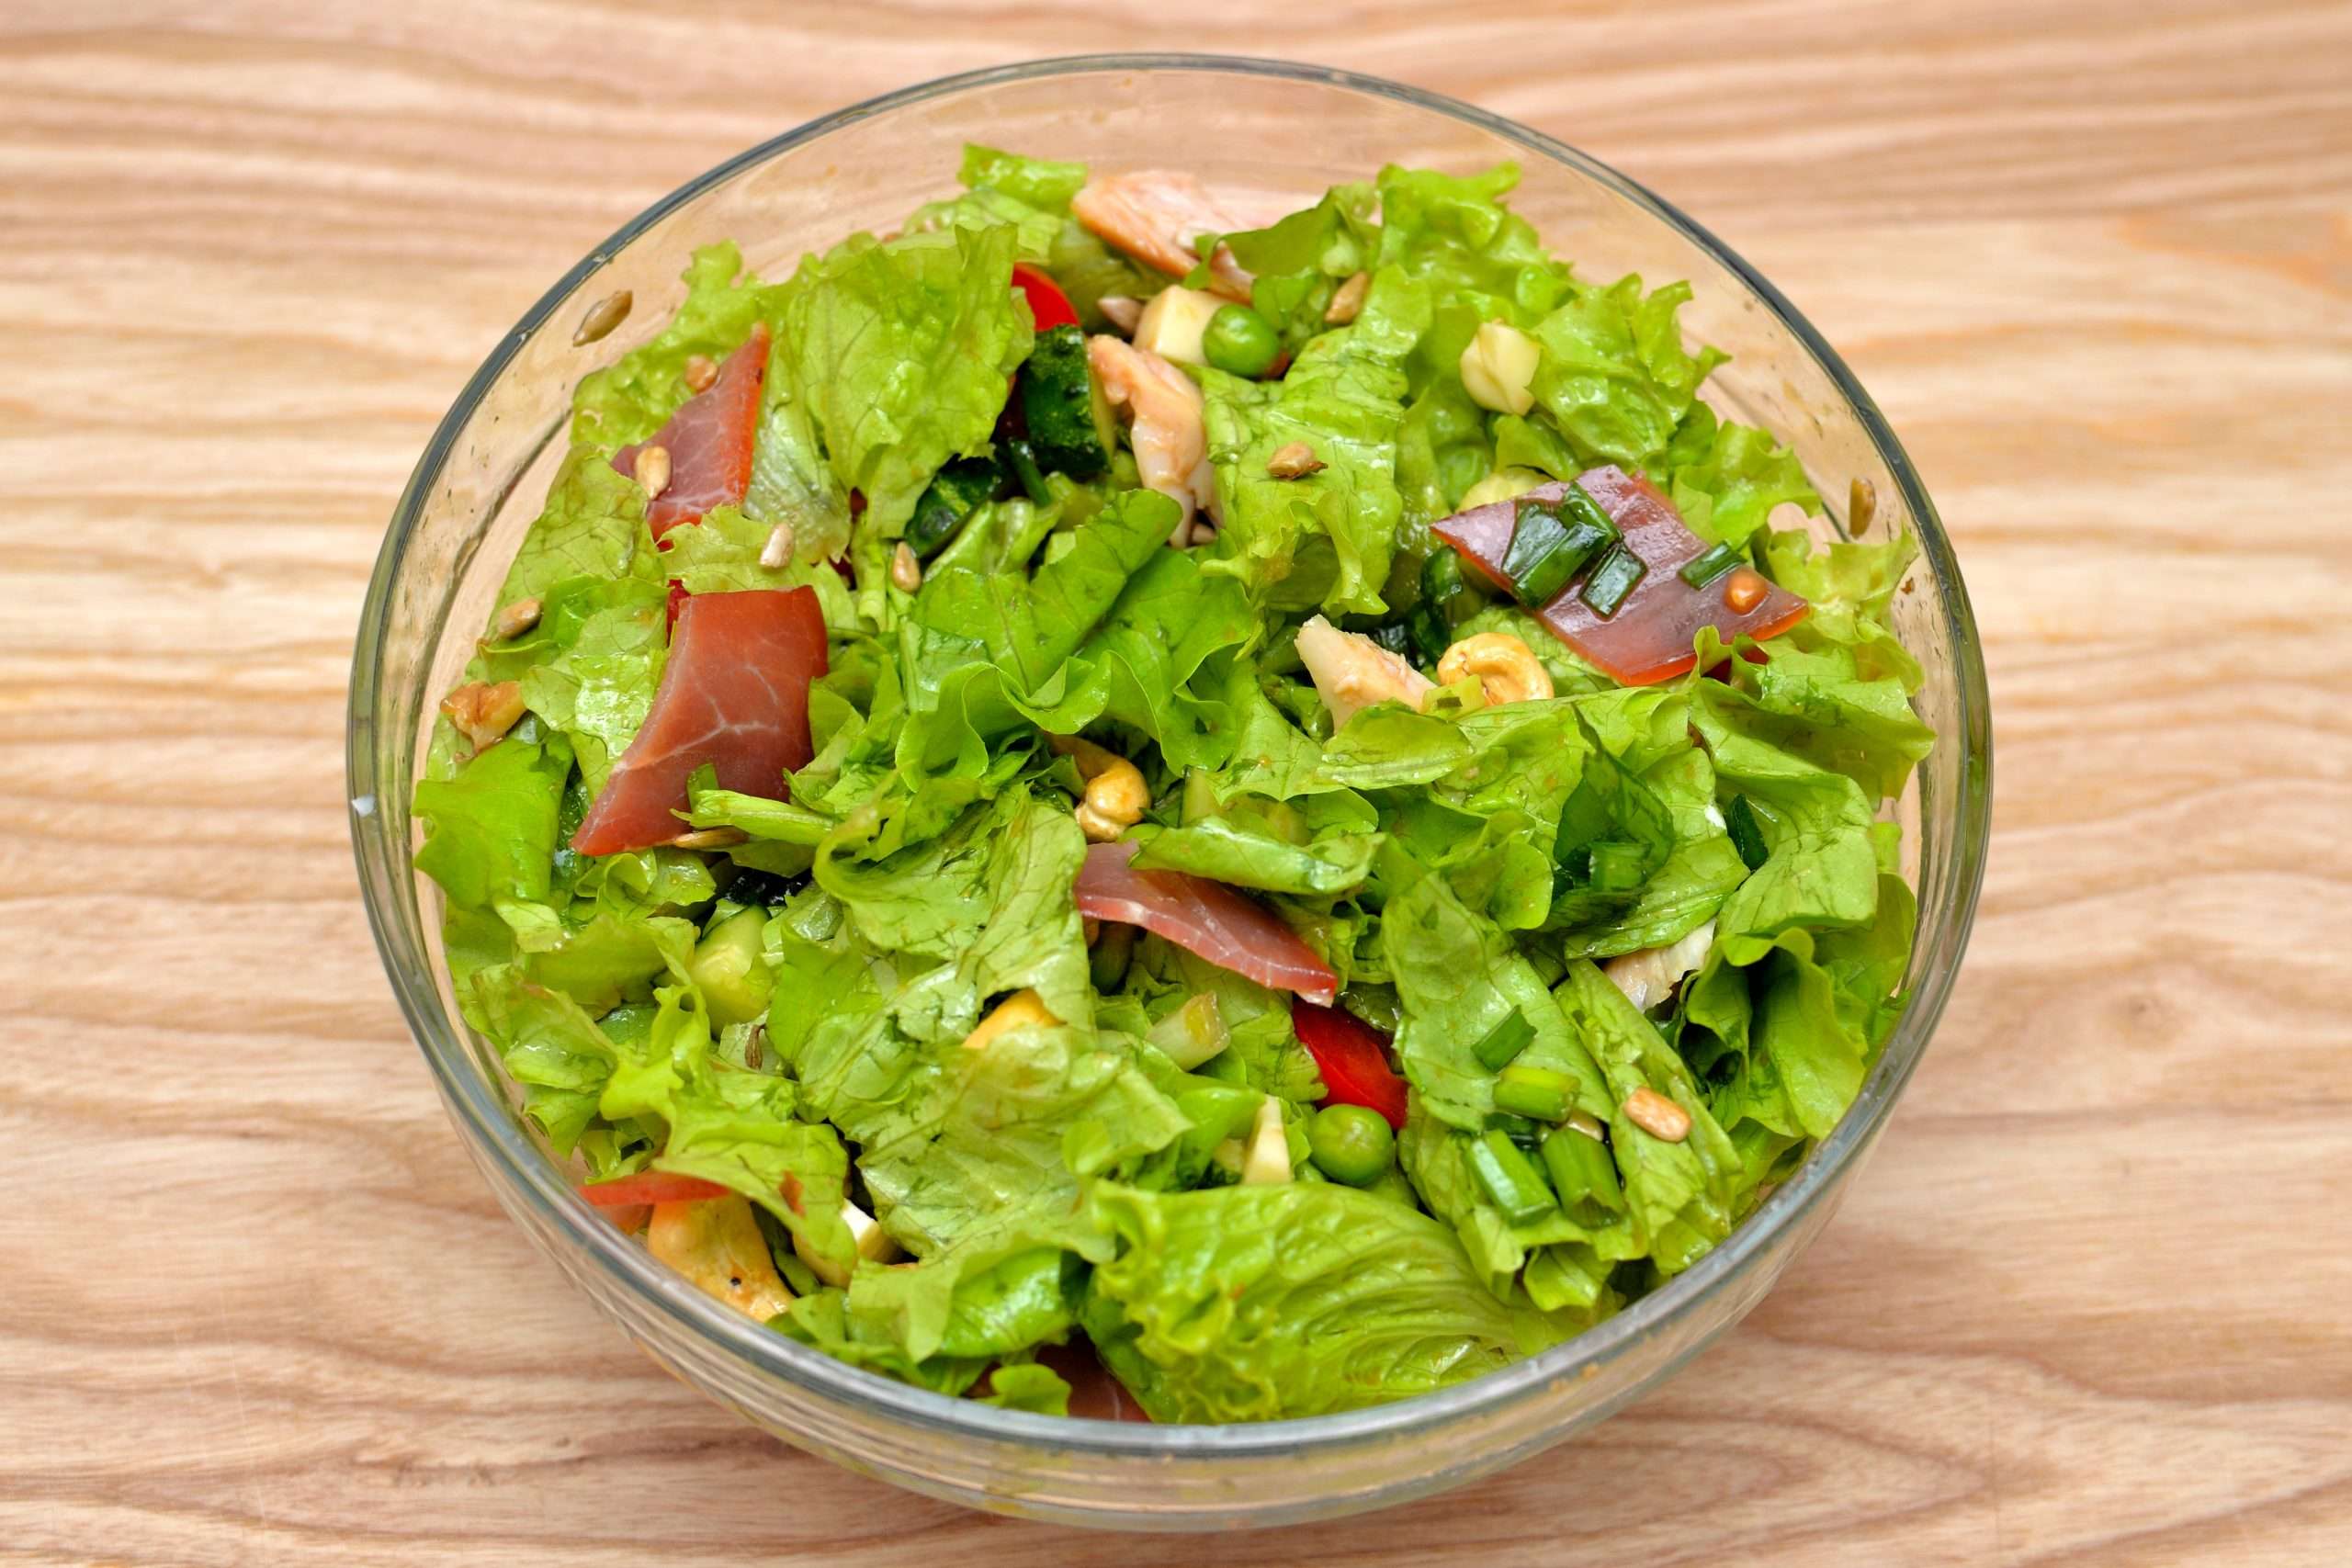 How to Make a Healthy Salad that Tastes Good: 8 Steps